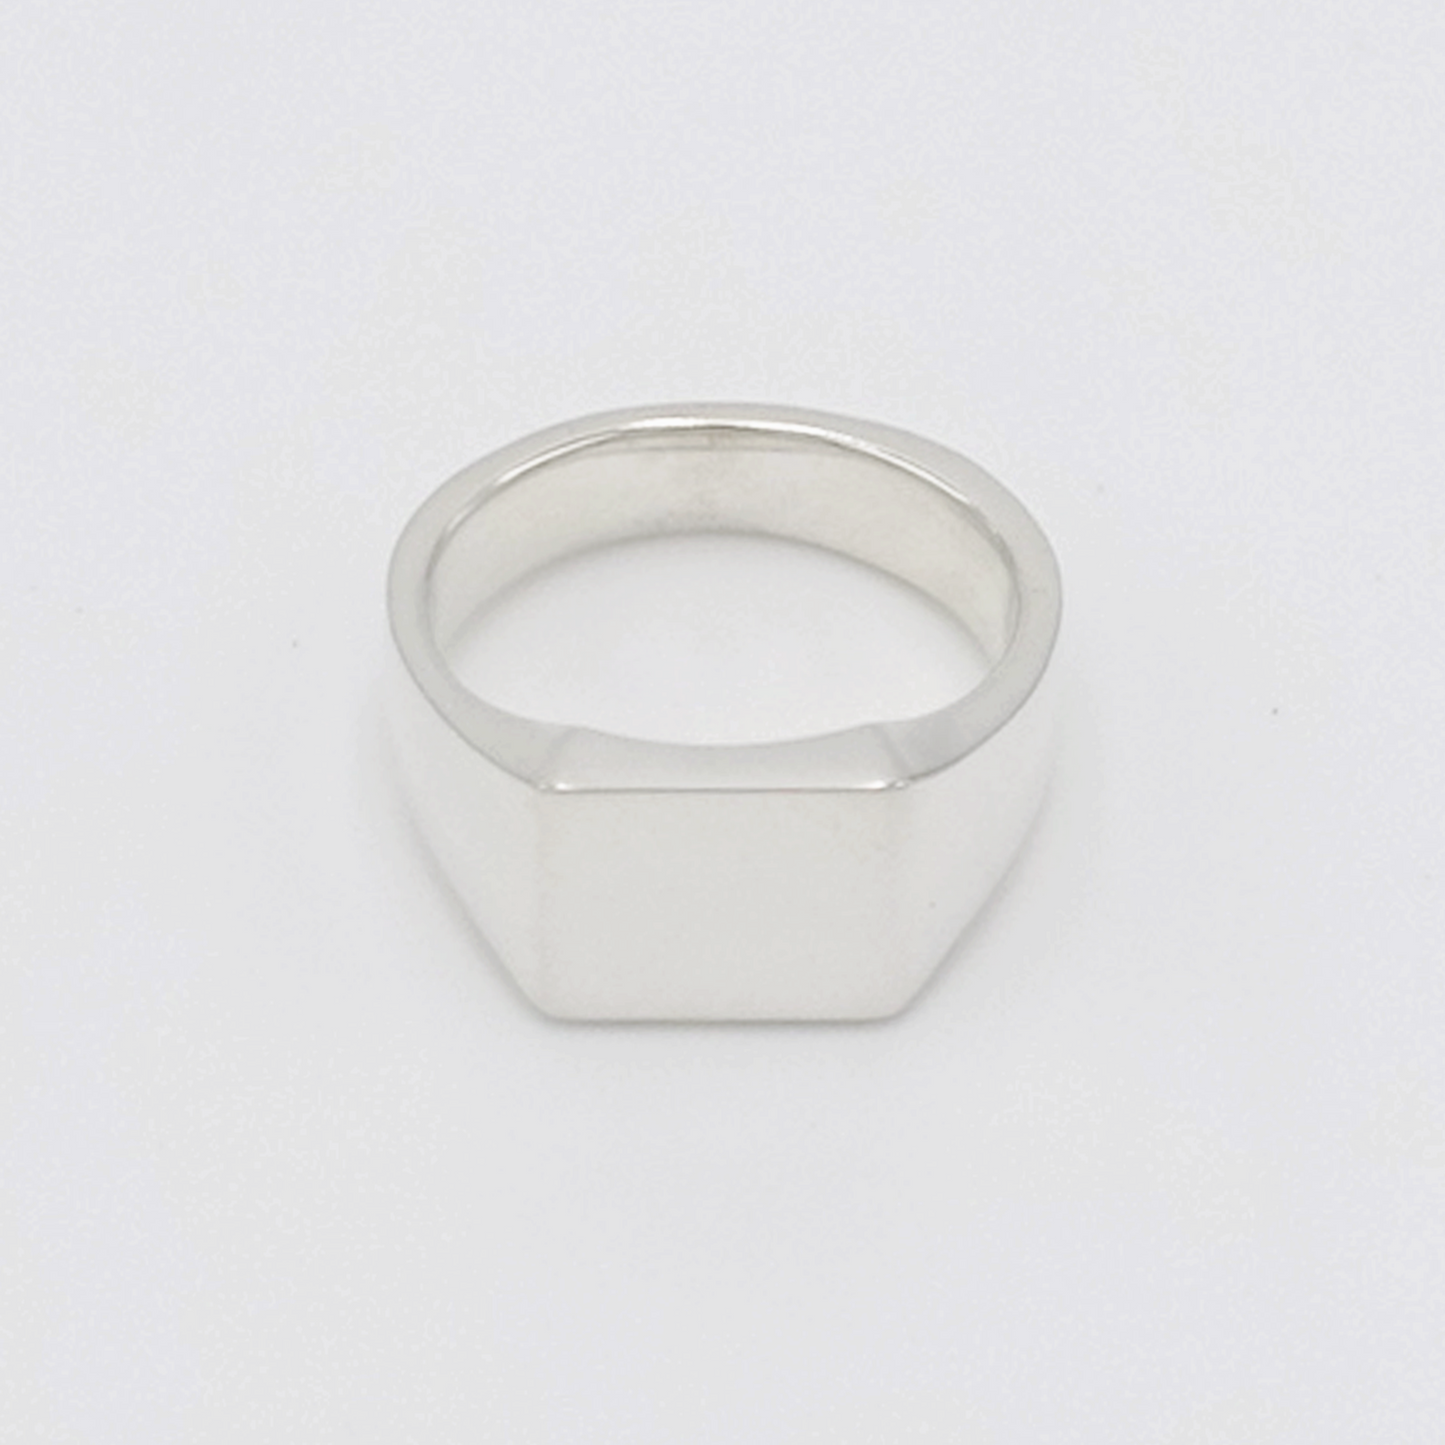 Signet Ring Square Wide